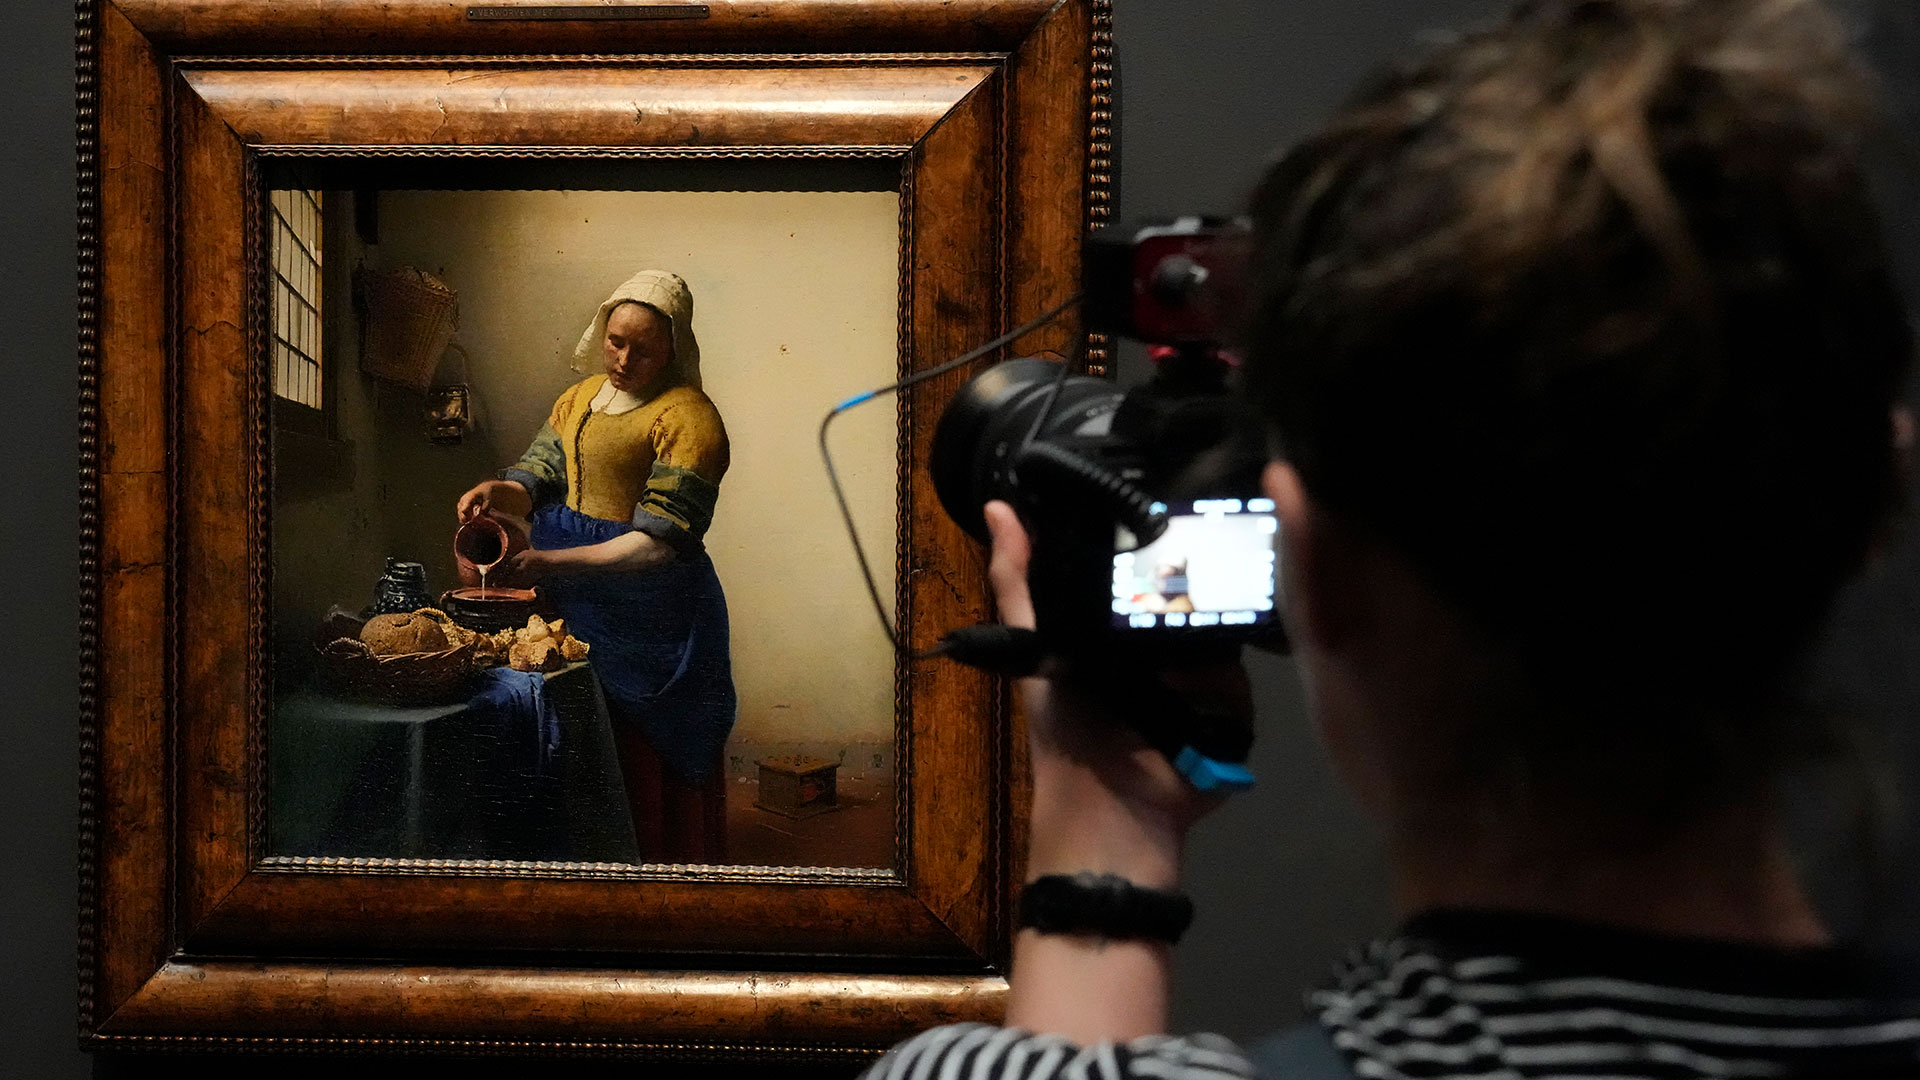 For the first time in its history, from February 10 to June 4, the Rijksmuseum is organizing an exhibition on Johannes Vermeer, which will be "the greatest exhibition of all time" about the Dutch artist (Photo: AP)